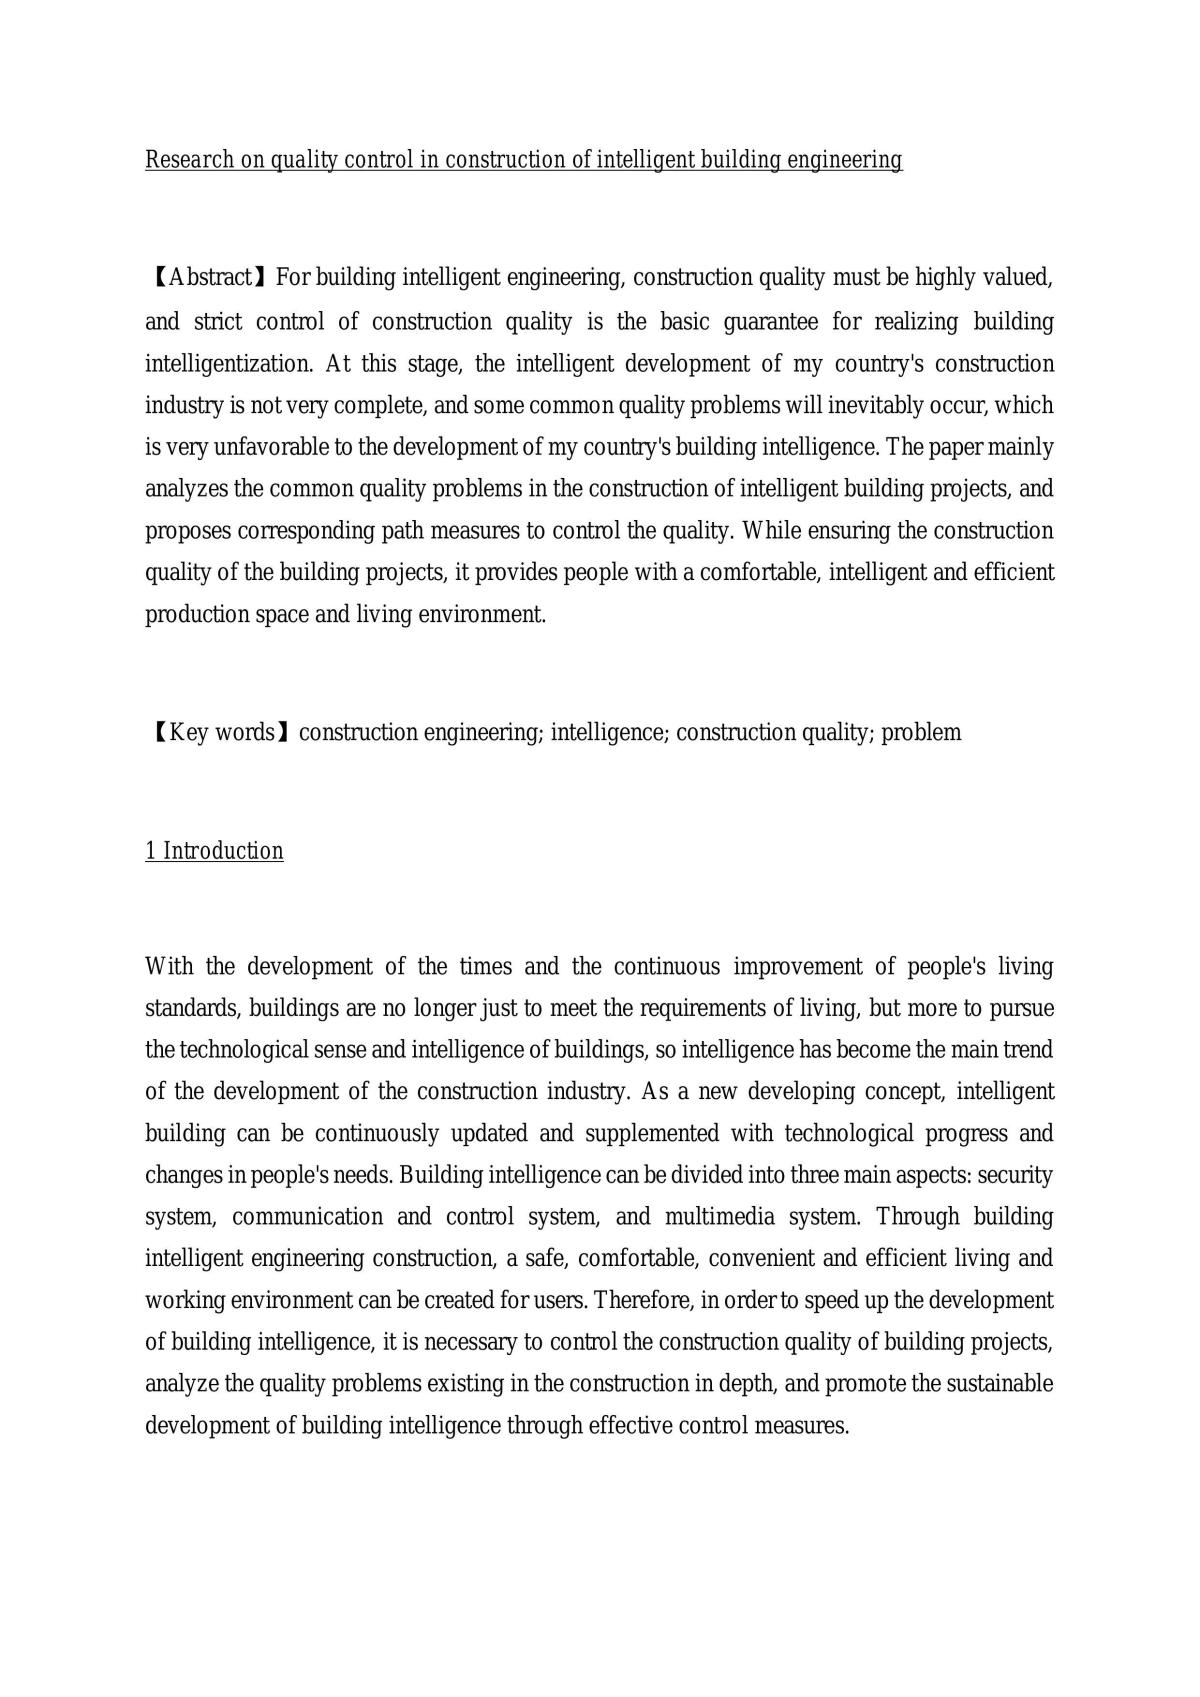 Research on quality control in construction of intelligent building engineering - Page 1